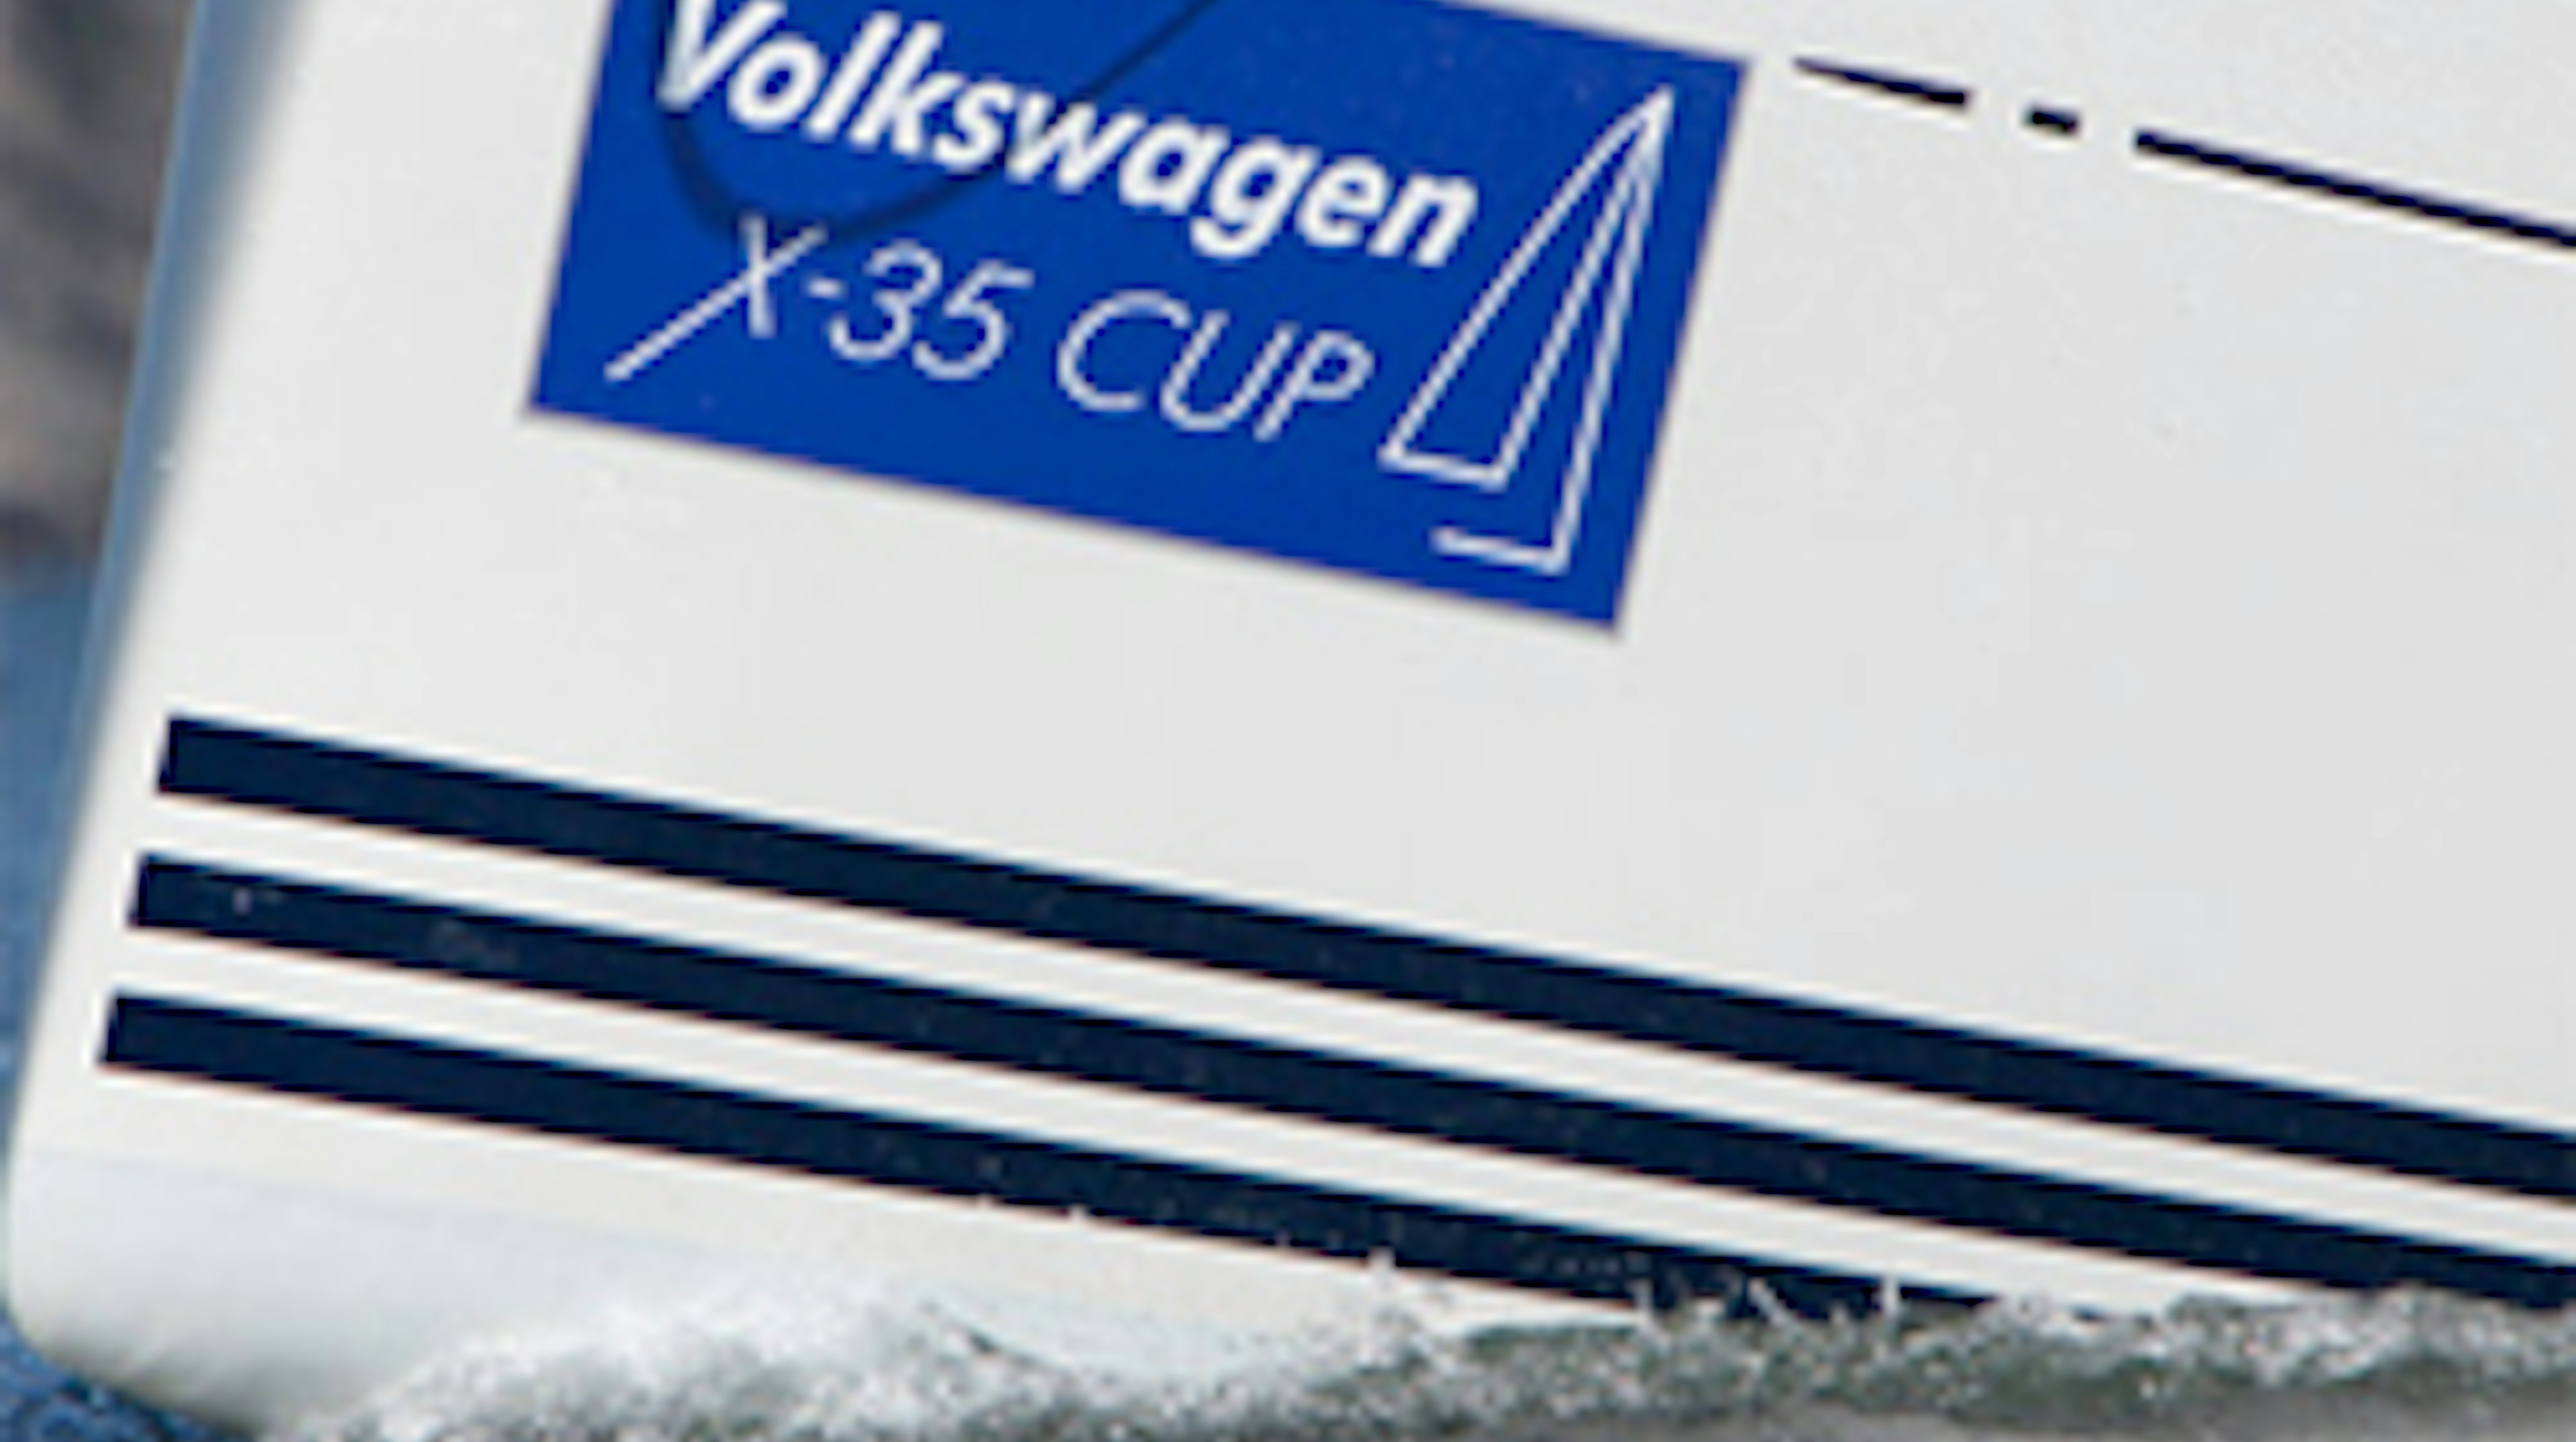 X-35_Cup